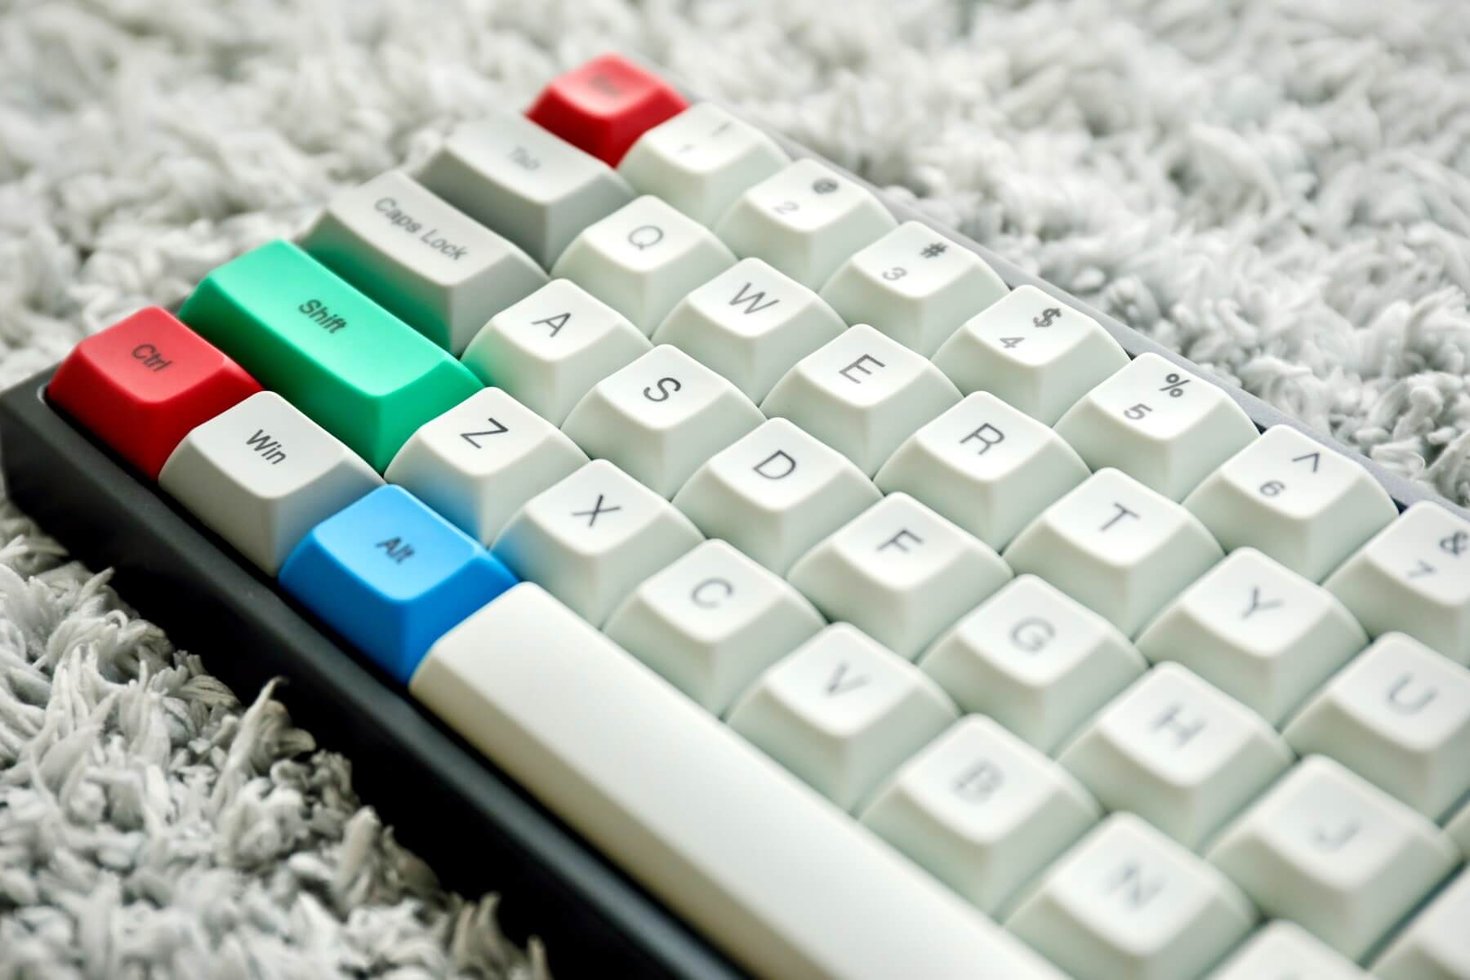 20 Useful Windows Keyboard Shortcuts to Speed Up Your Workflow image